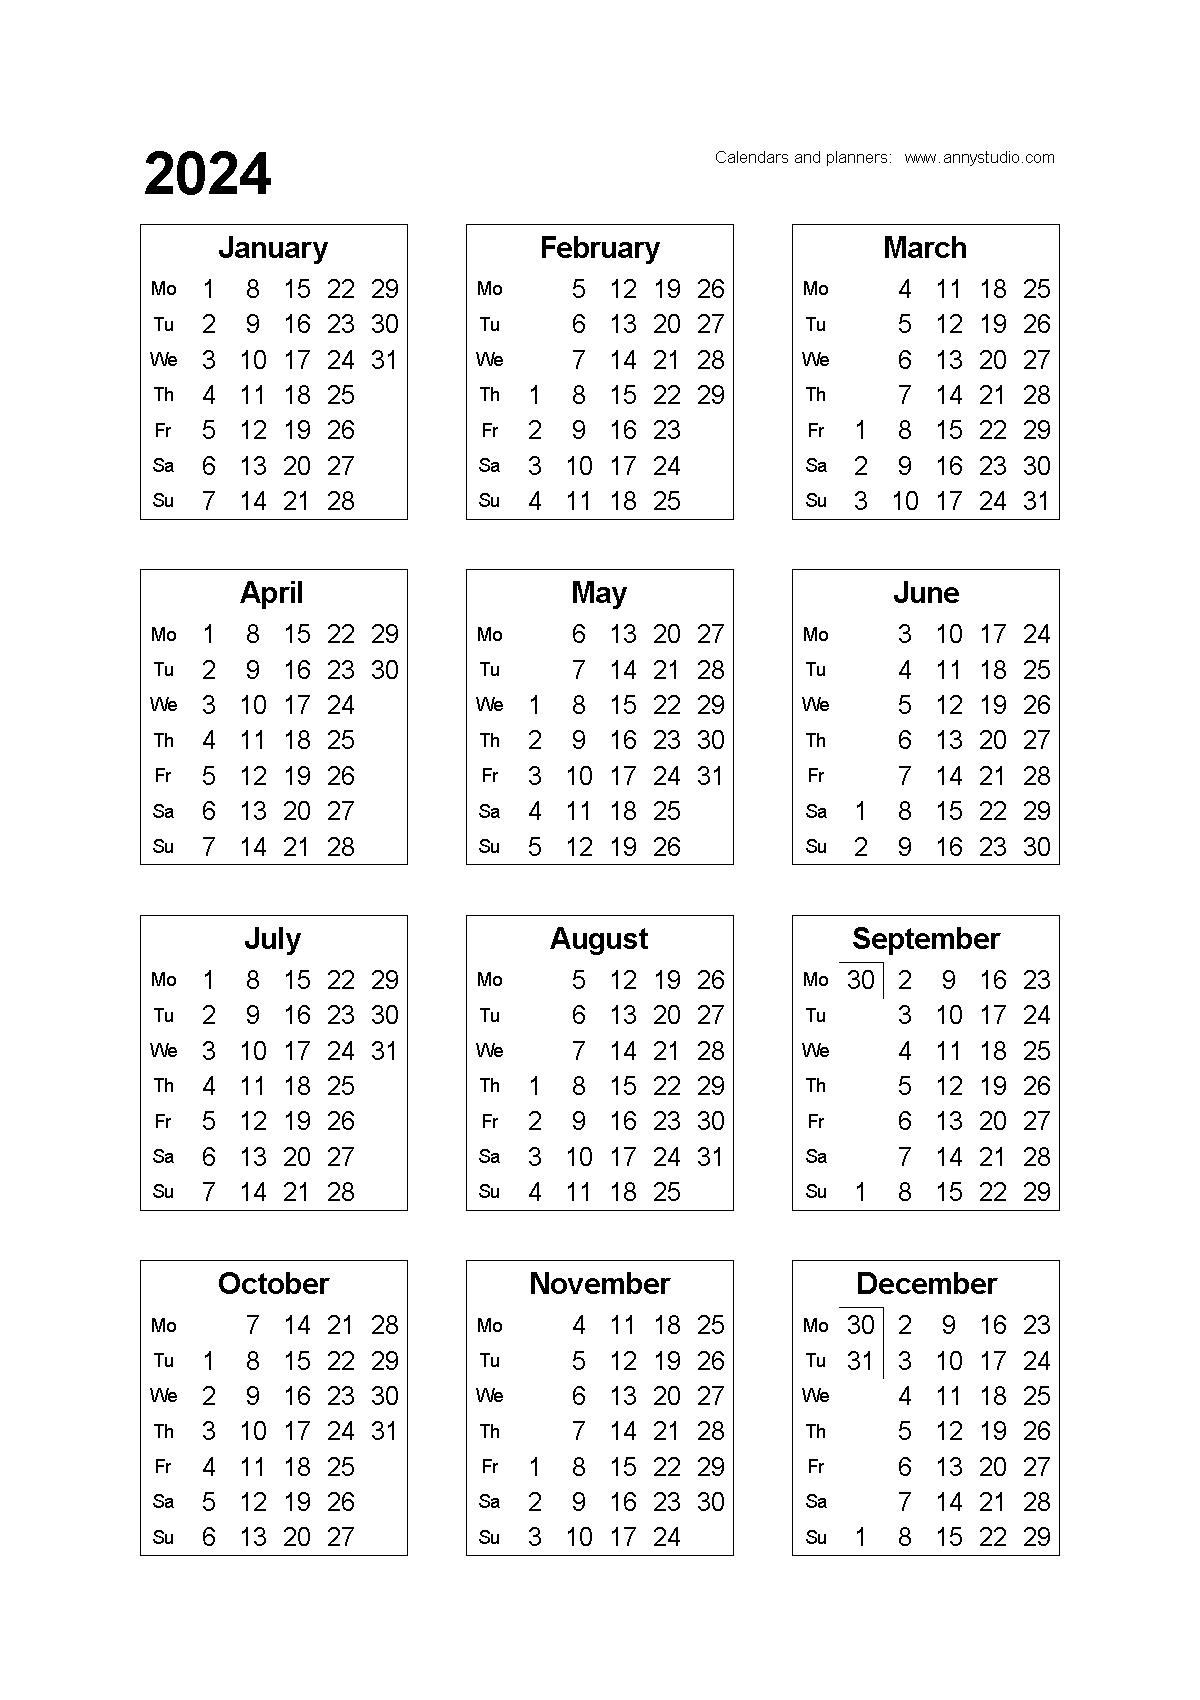 Free Printable Calendars And Planners 2024, 2025 And 2026 | 2024 Yearly Calendar Calendar Labs